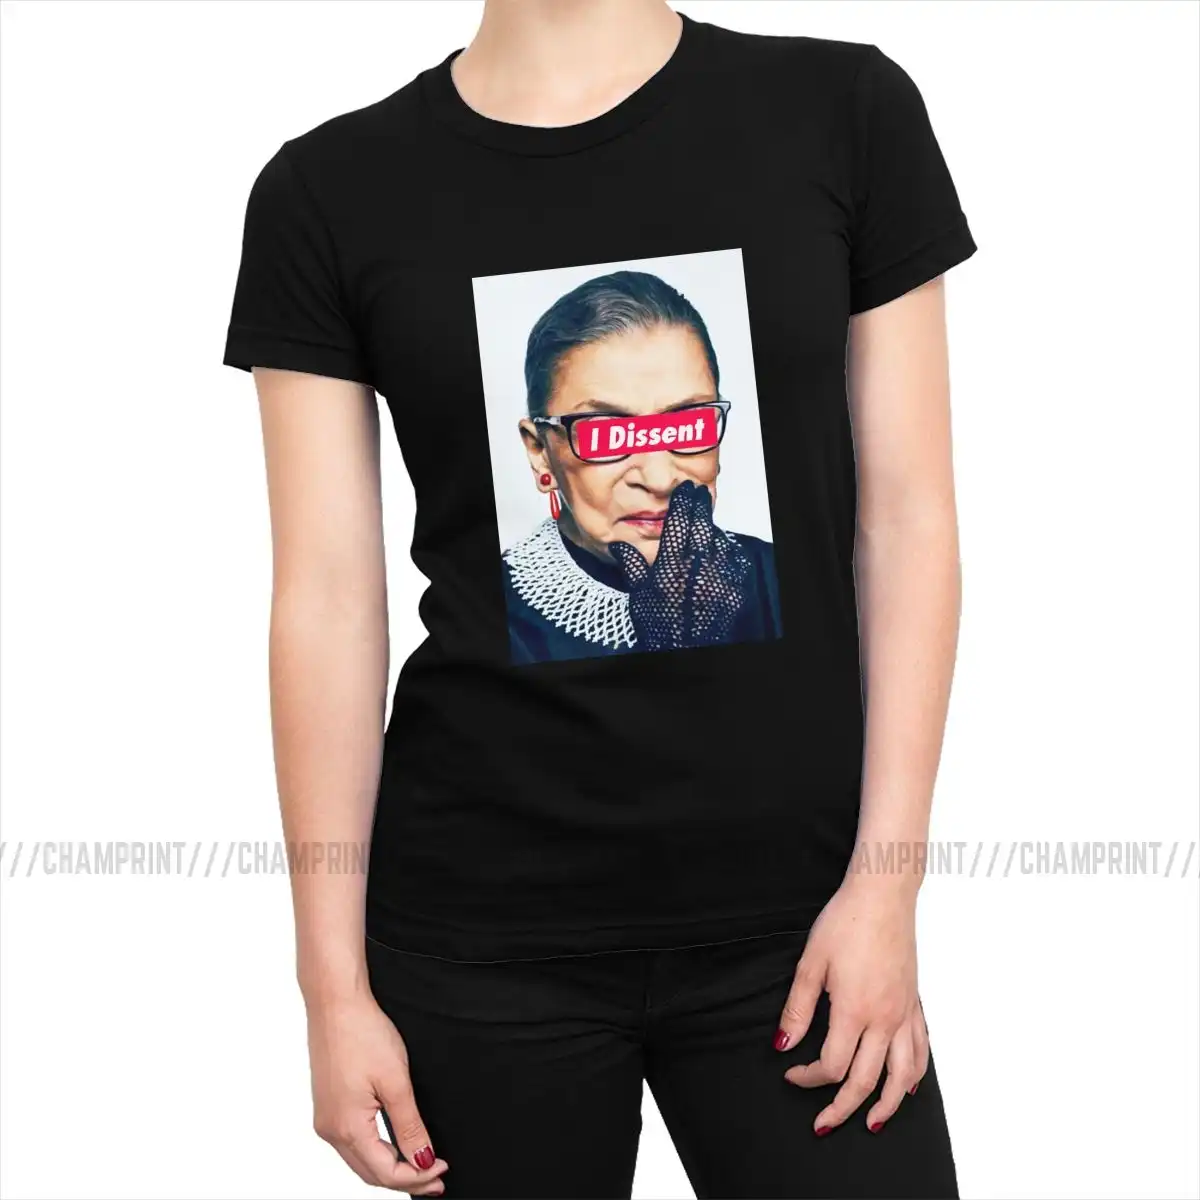 RBG Notorious Ruth Bader Ginsburg Tshirt for Women I Dissent Womens T Shirts